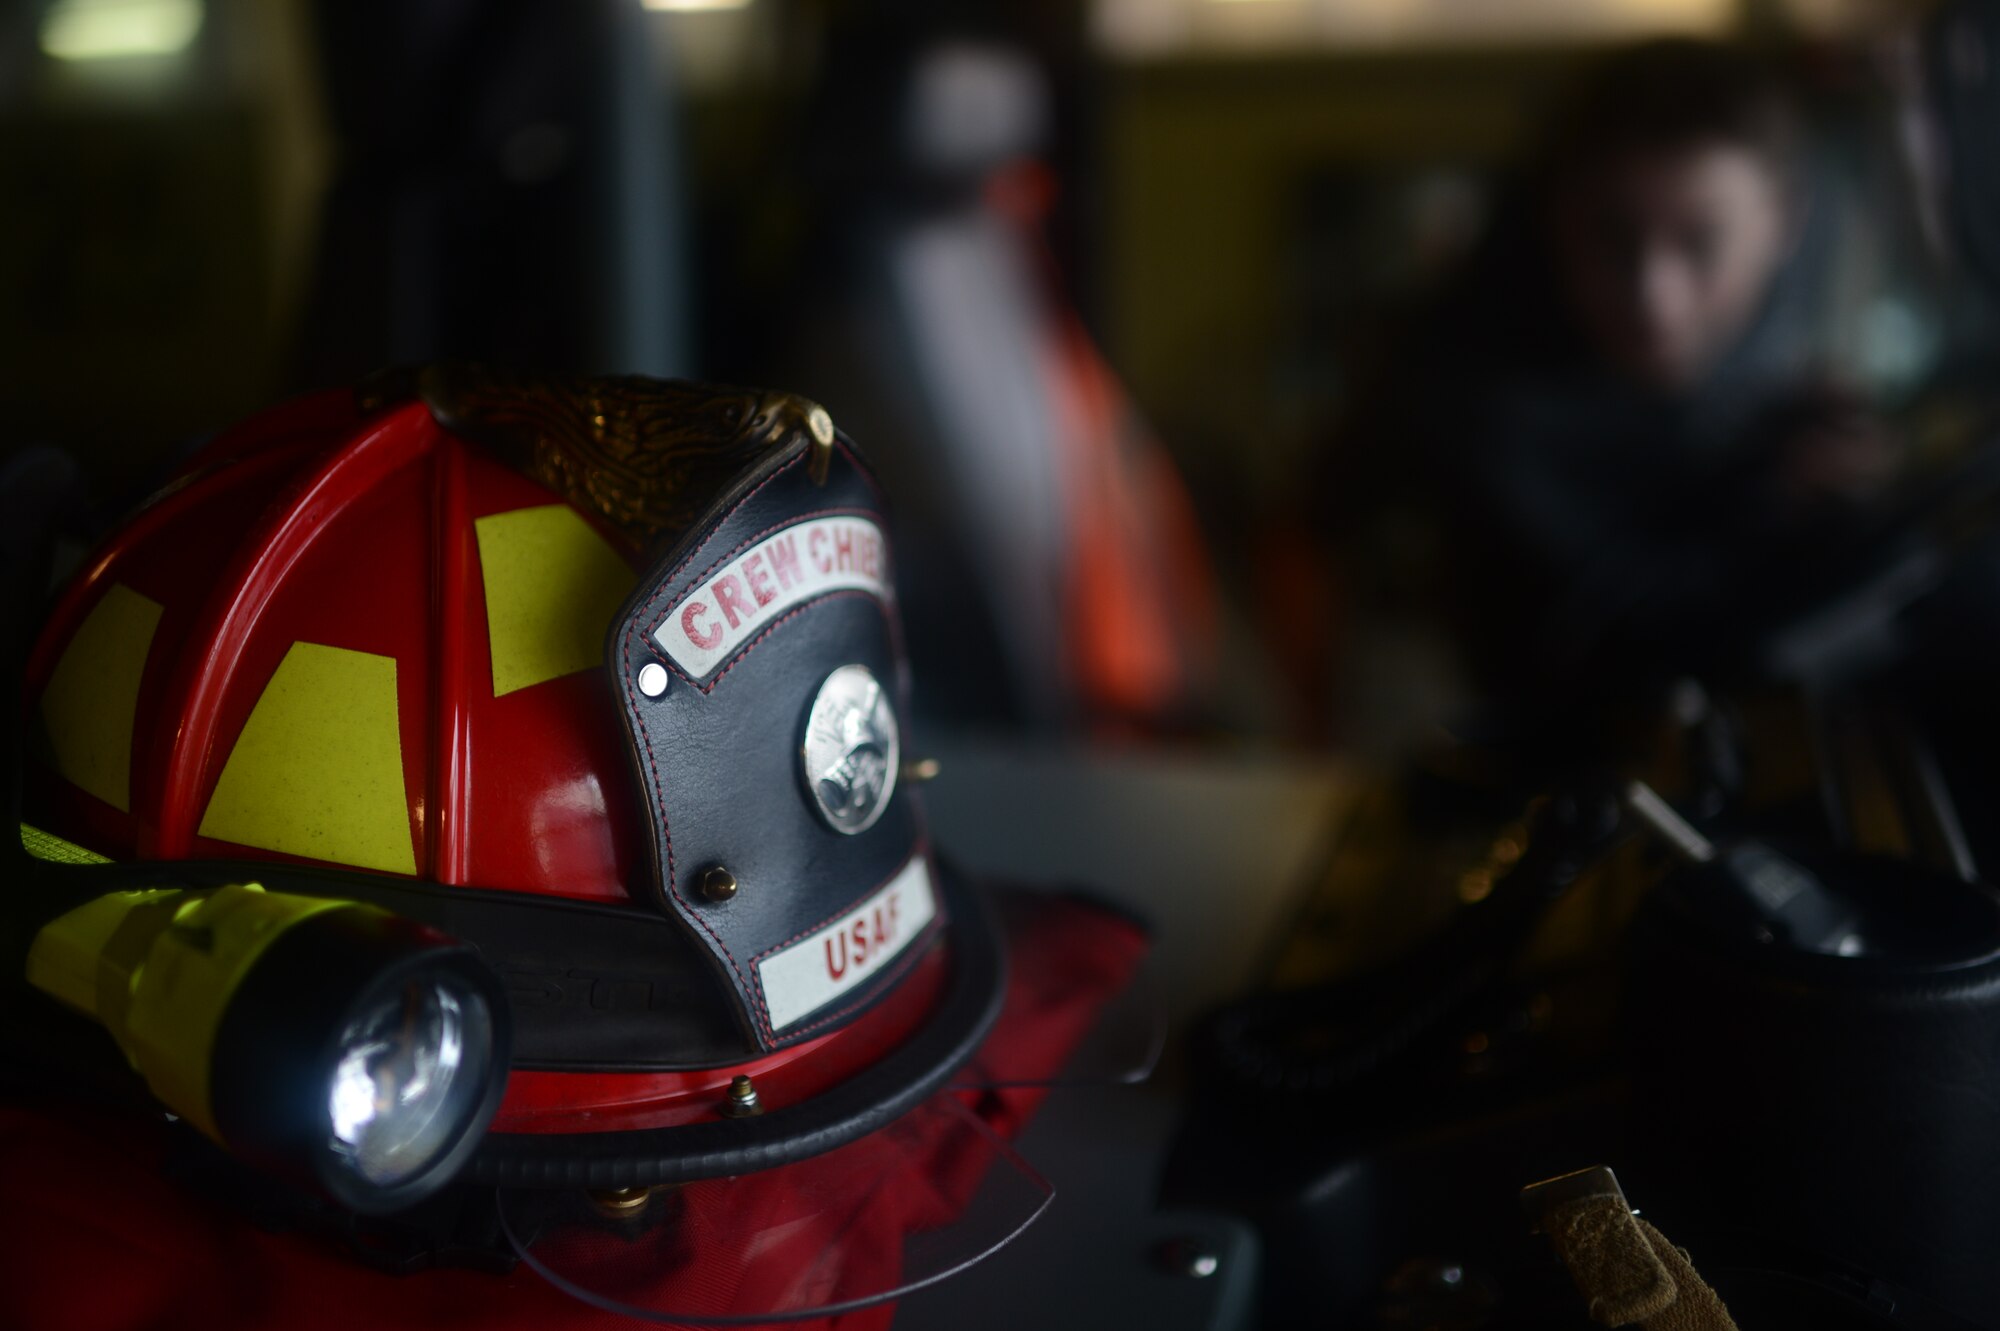 A firefighter’s safety helmet rests inside a fire truck at Spangdahlem Air Base, Germany, Oct. 27, 2014. The tour included a look at the base’s passenger terminal, a fire station and ended with photo opportunities at the air park. (U.S. Air Force photo by Senior Airman Gustavo Castillo/Released)